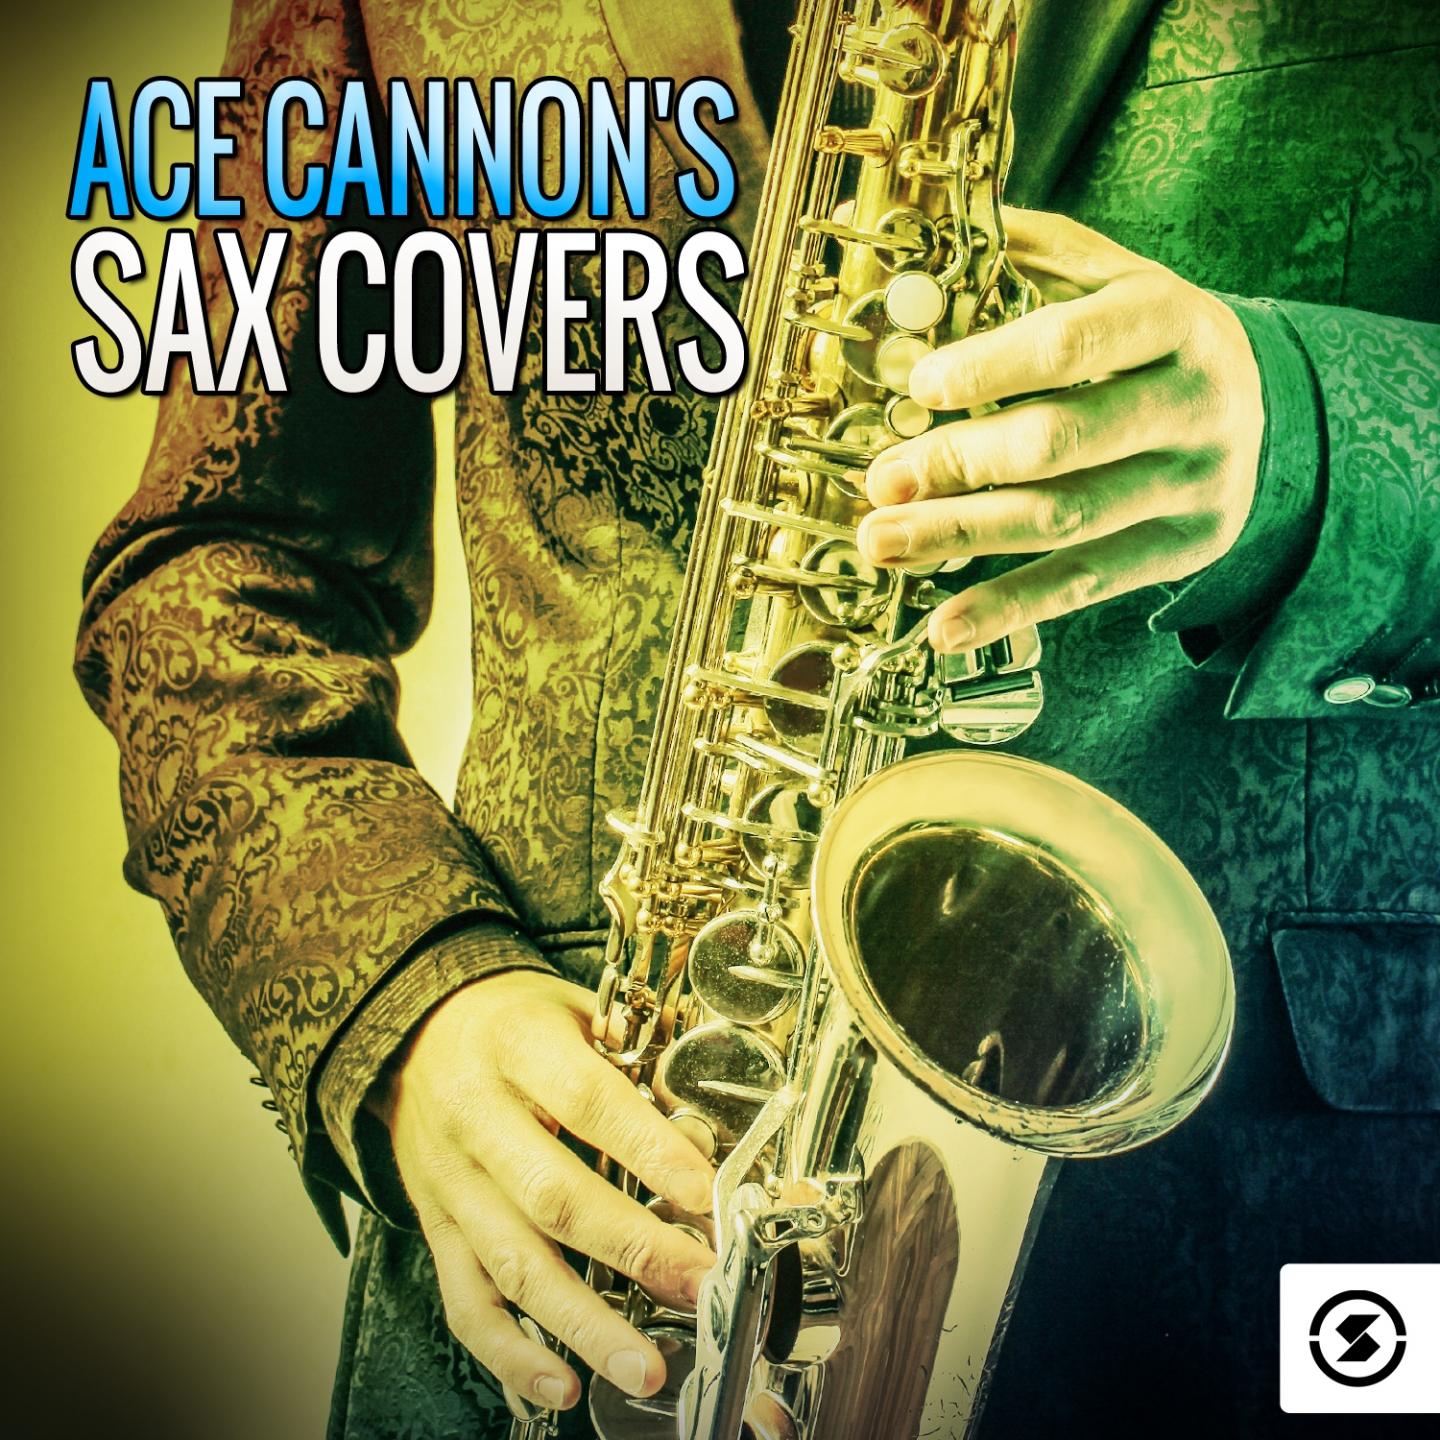 Ace Cannon's Sax Covers